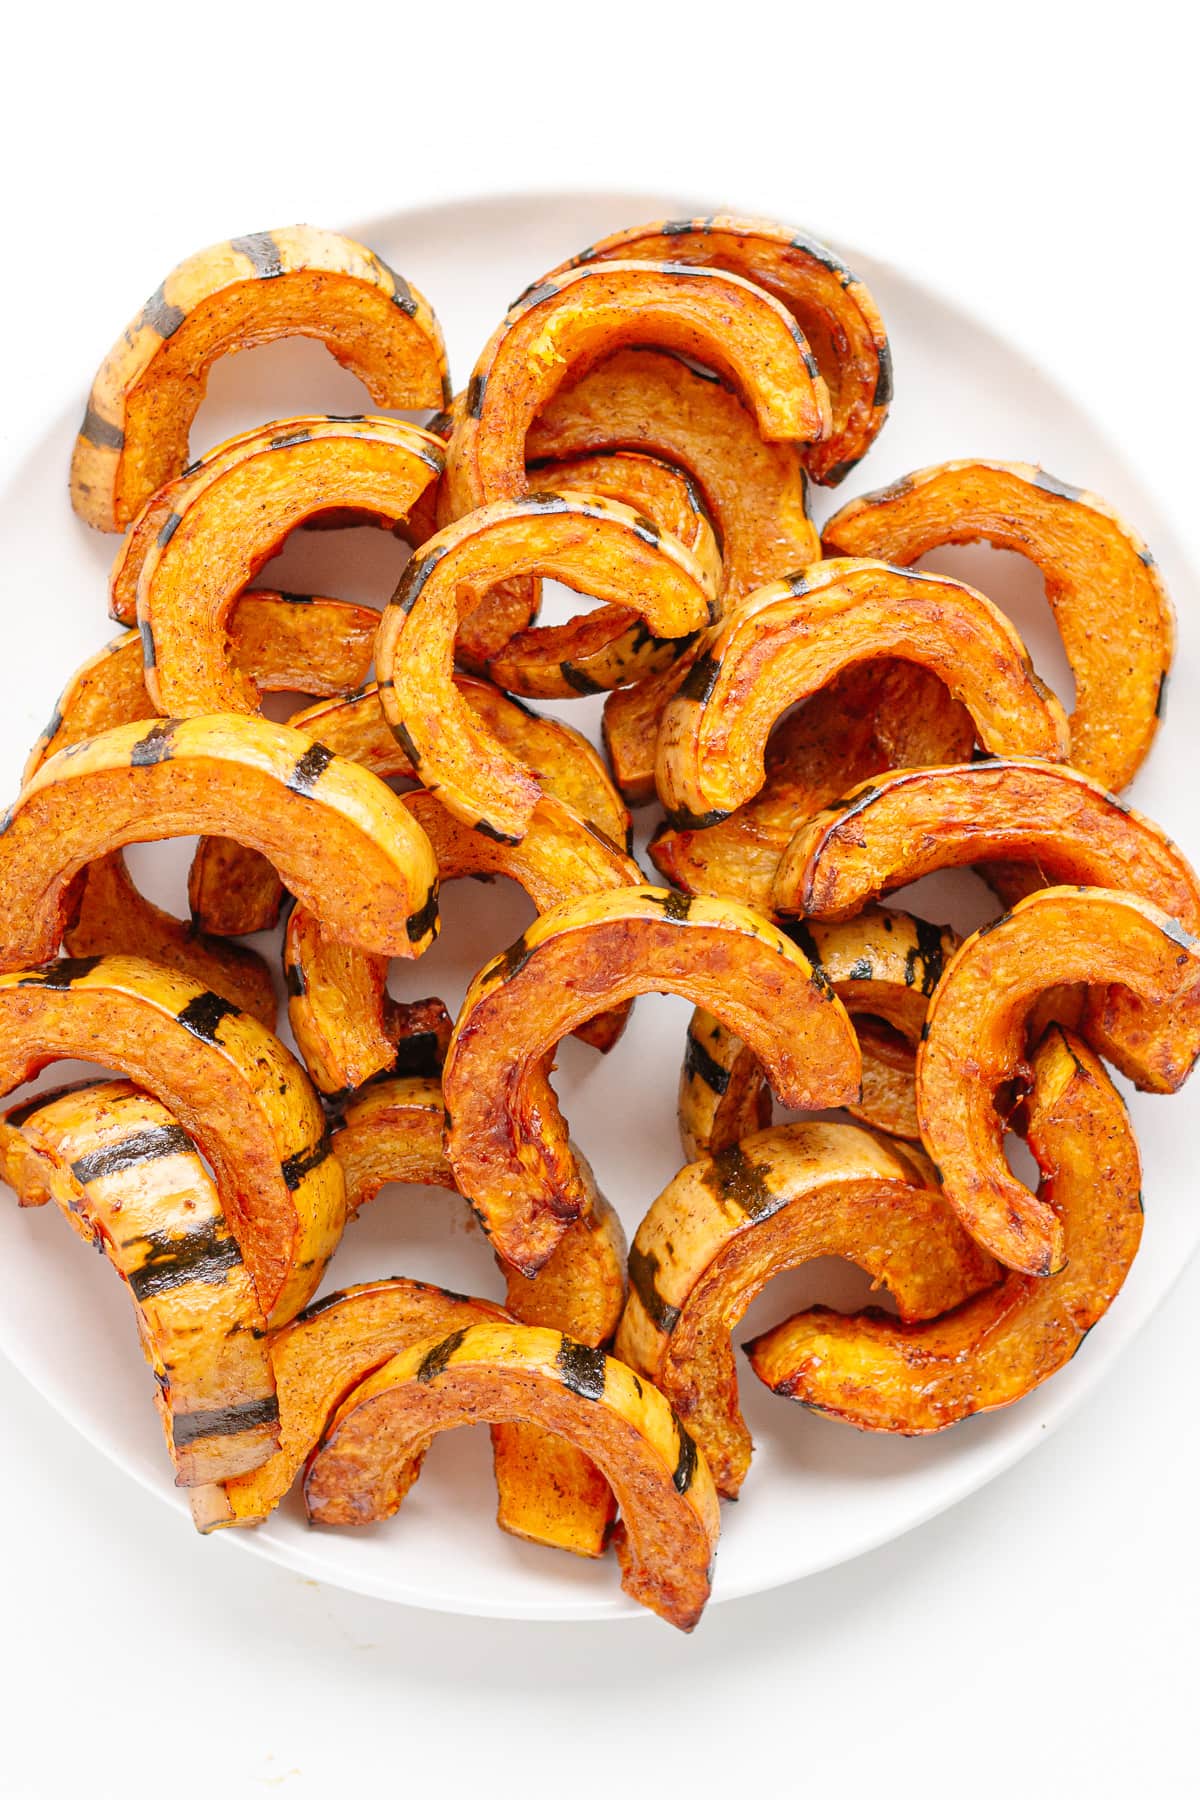 Maple roasted delicata squash slices on a white plate.